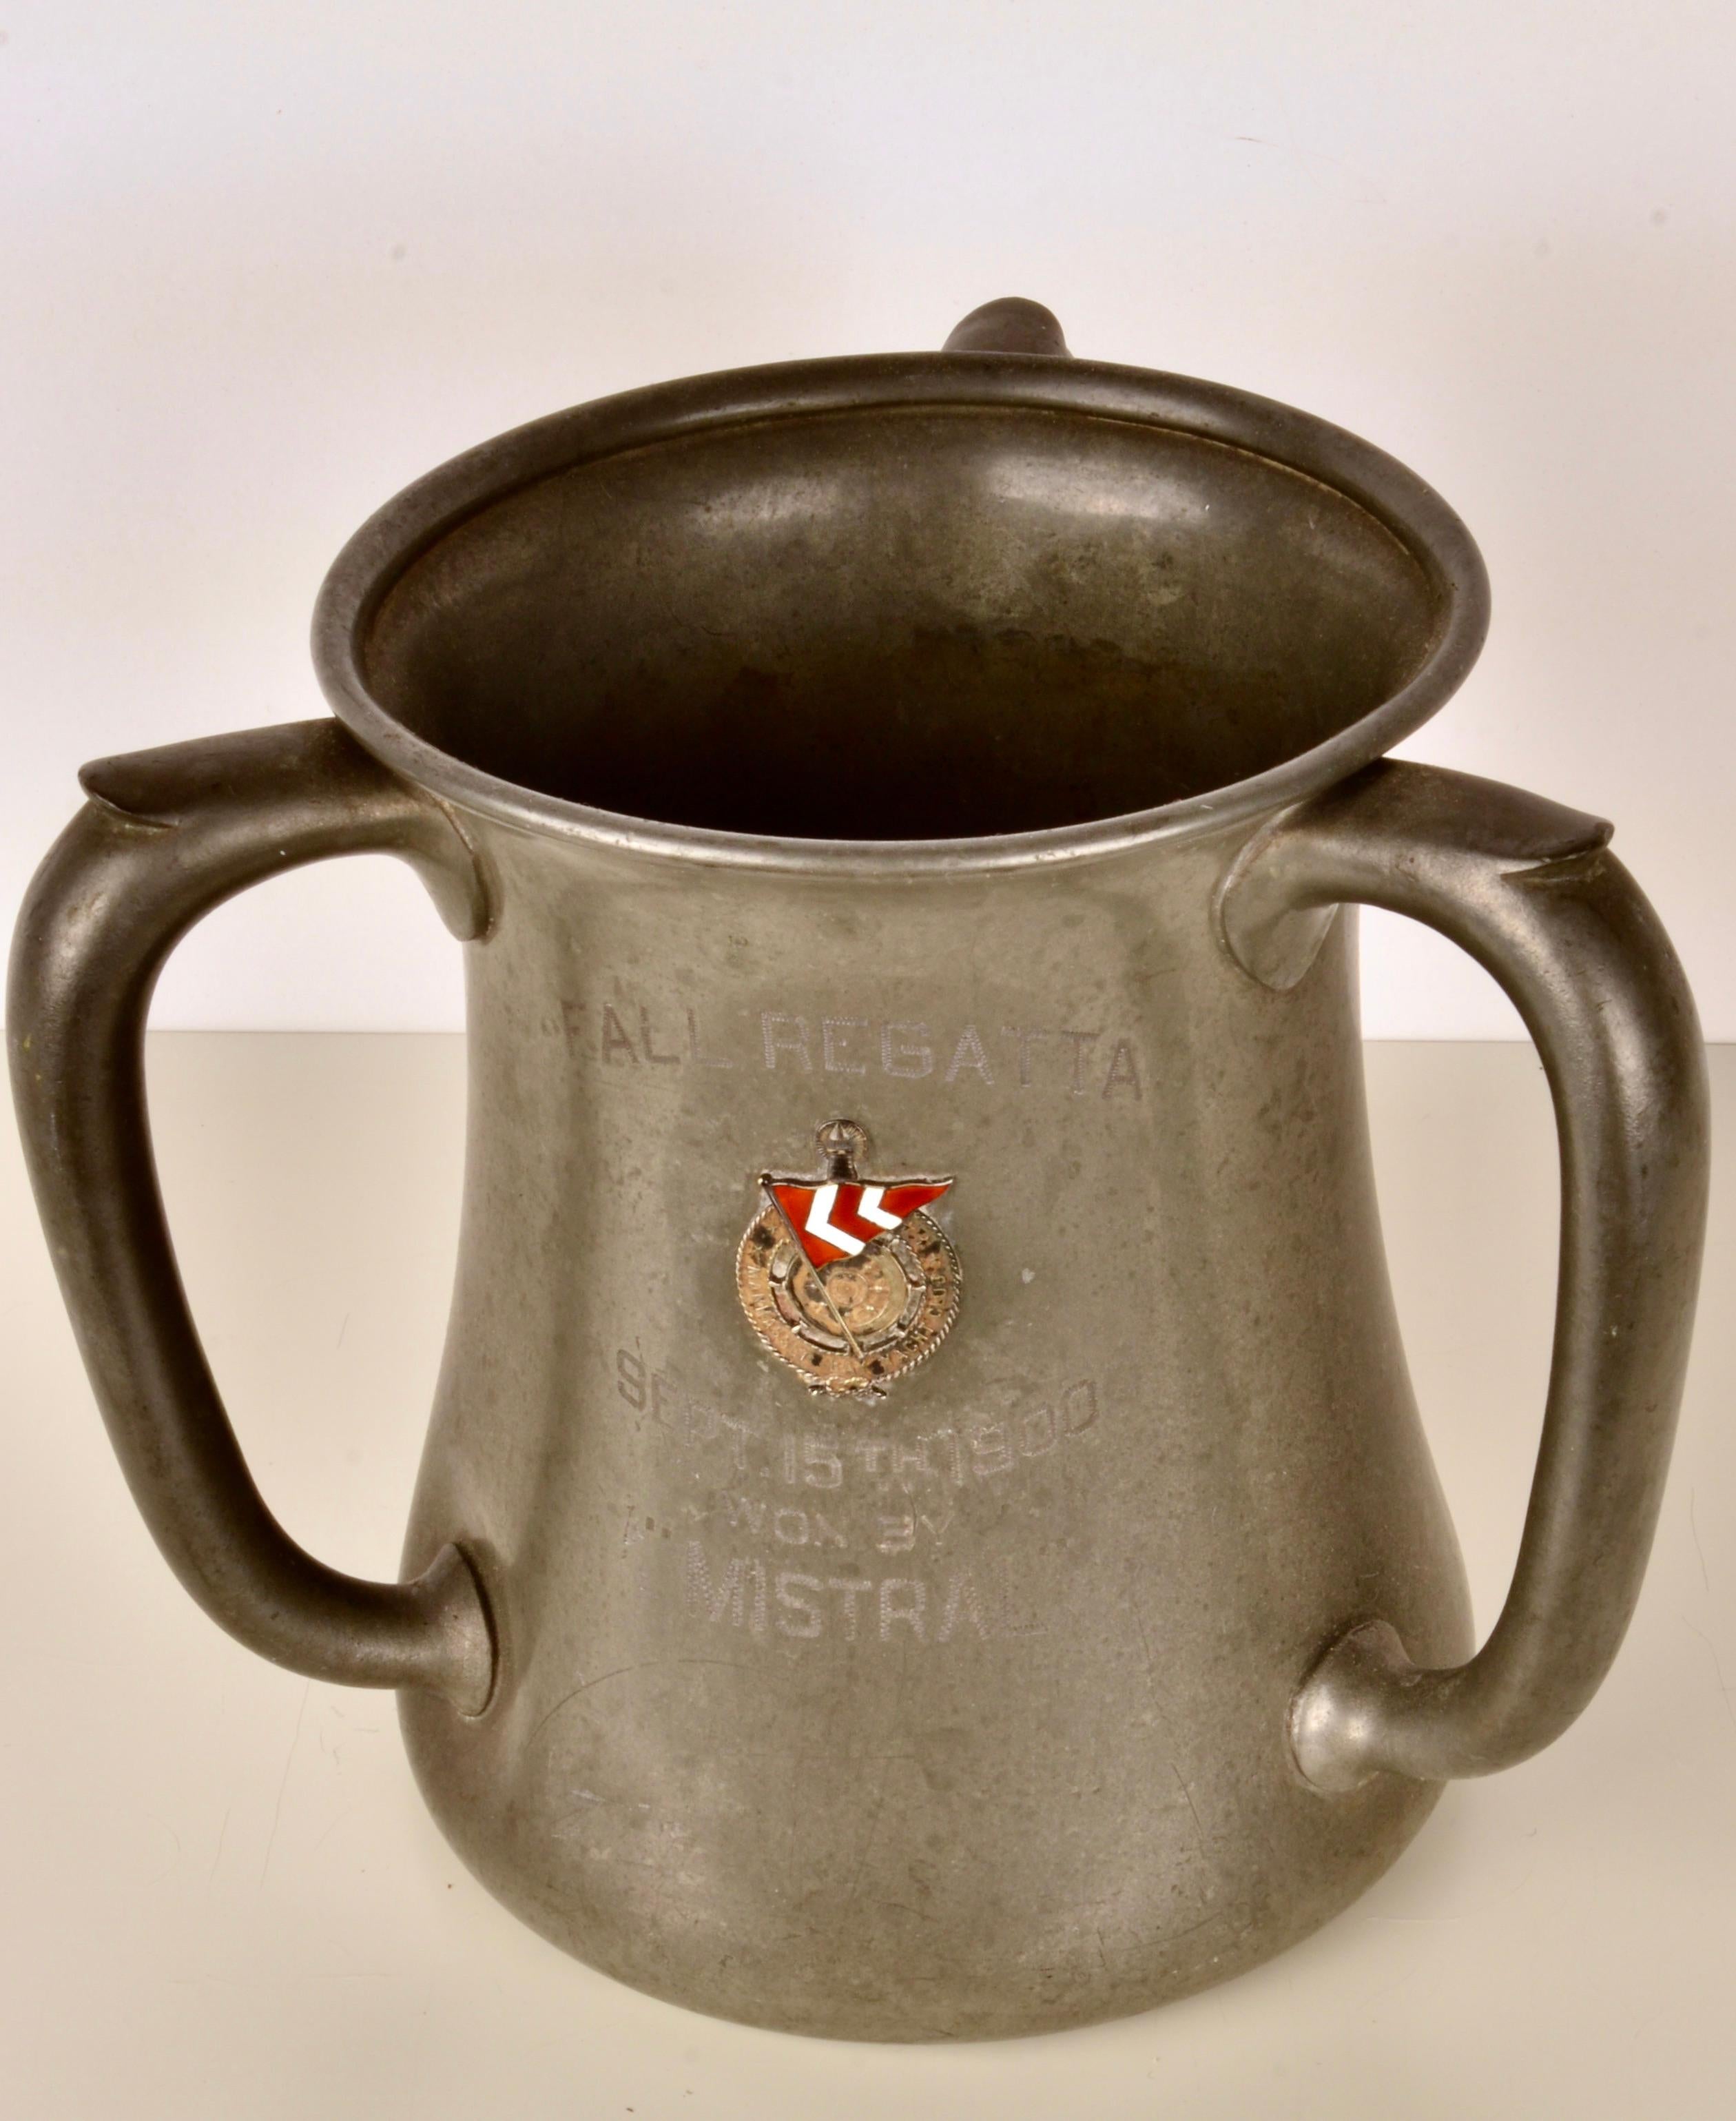 This pewter trophy was awarded to the Yacht Mistral for a win in the Manhassett Bay Yacht Club Fall Regatta in 1900. The prestigious MBYC was founded in 1891 and is still an active club today. The cup is in the traditional loving cup form and